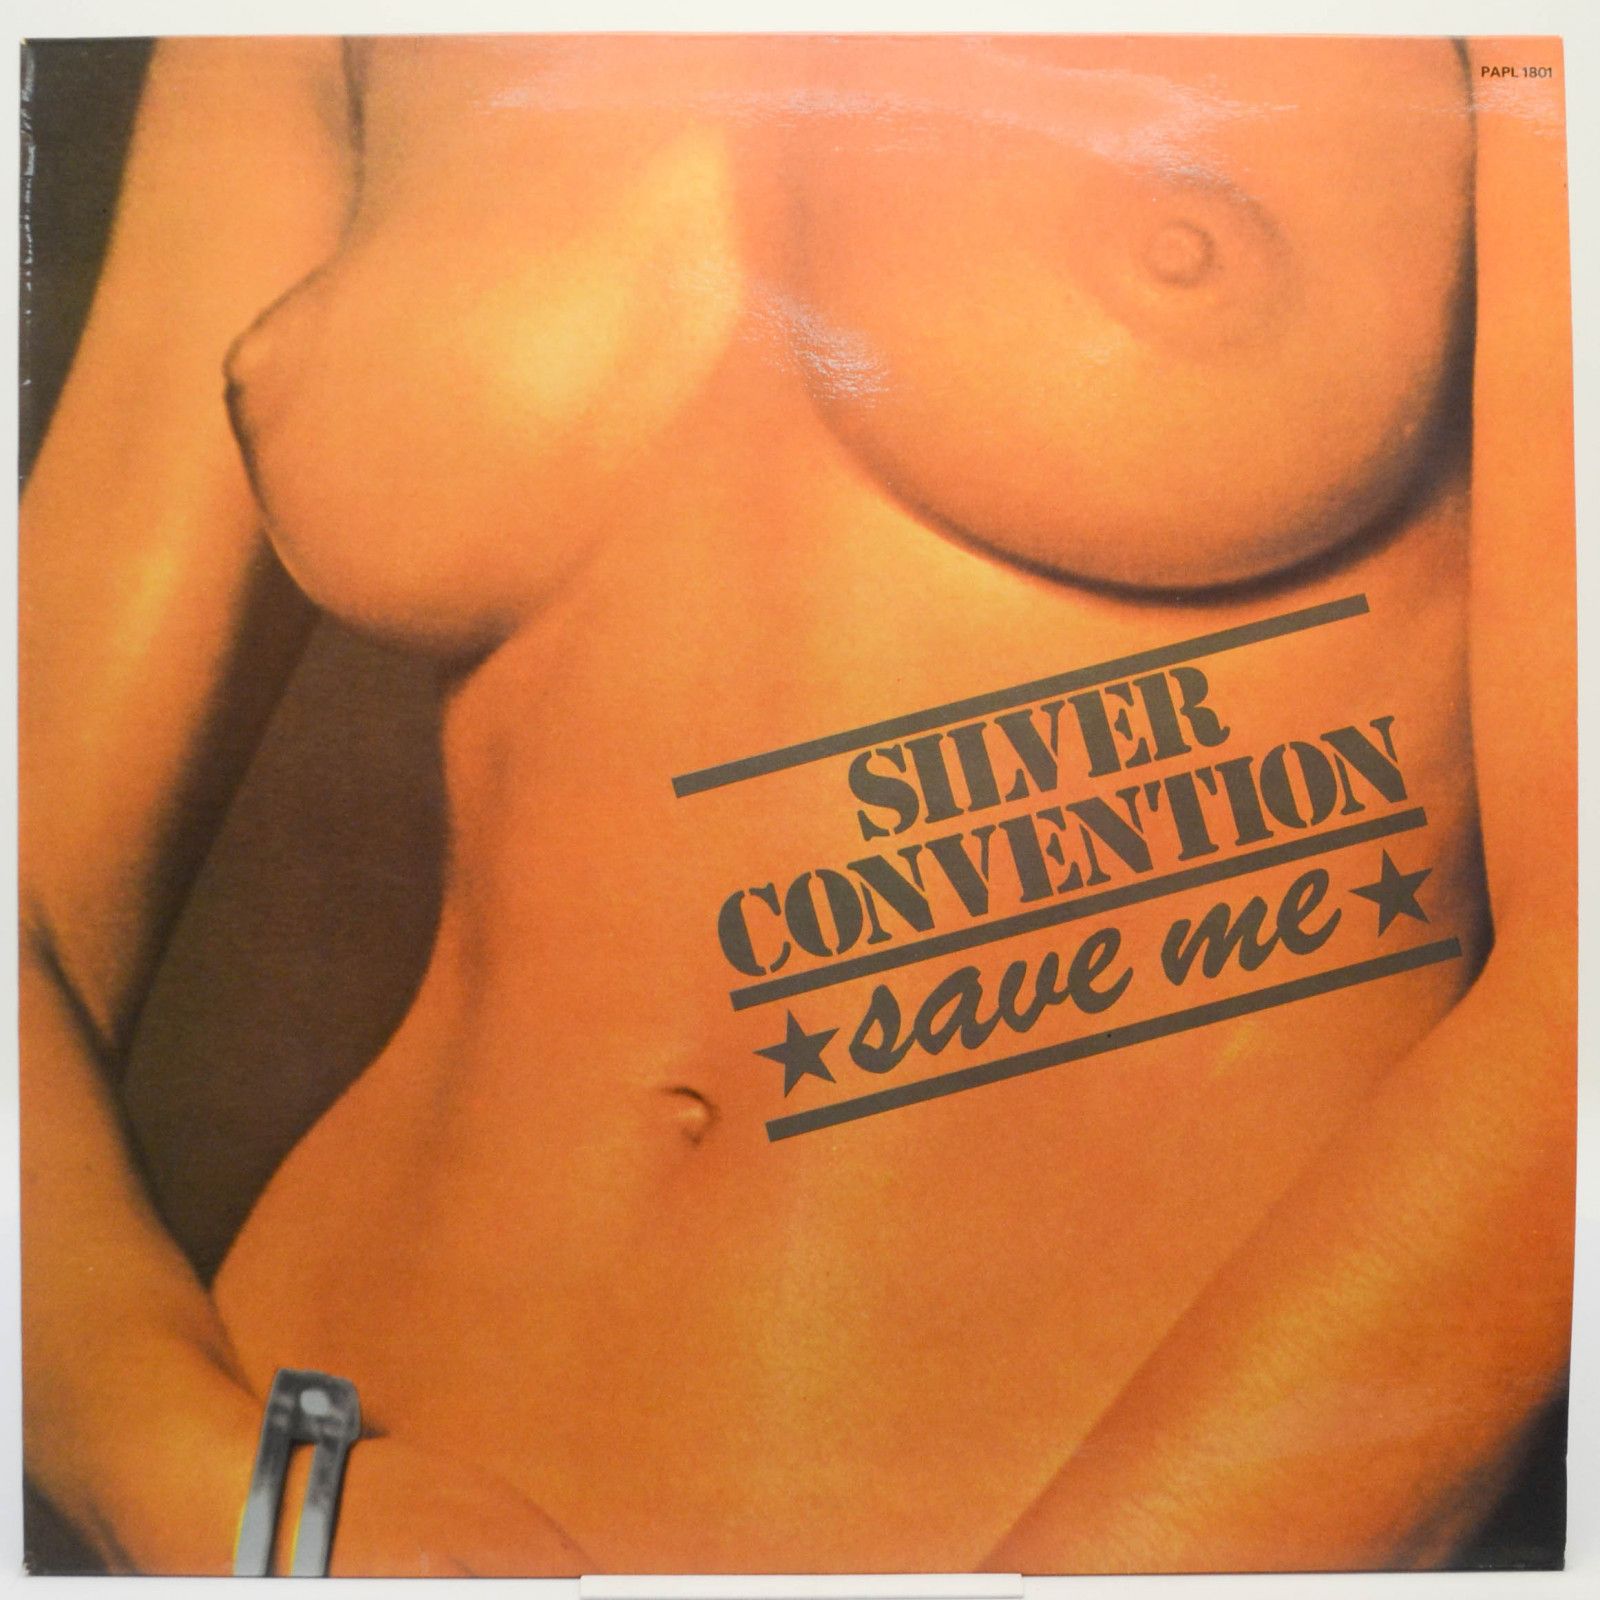 Silver Convention — Save Me, 1975